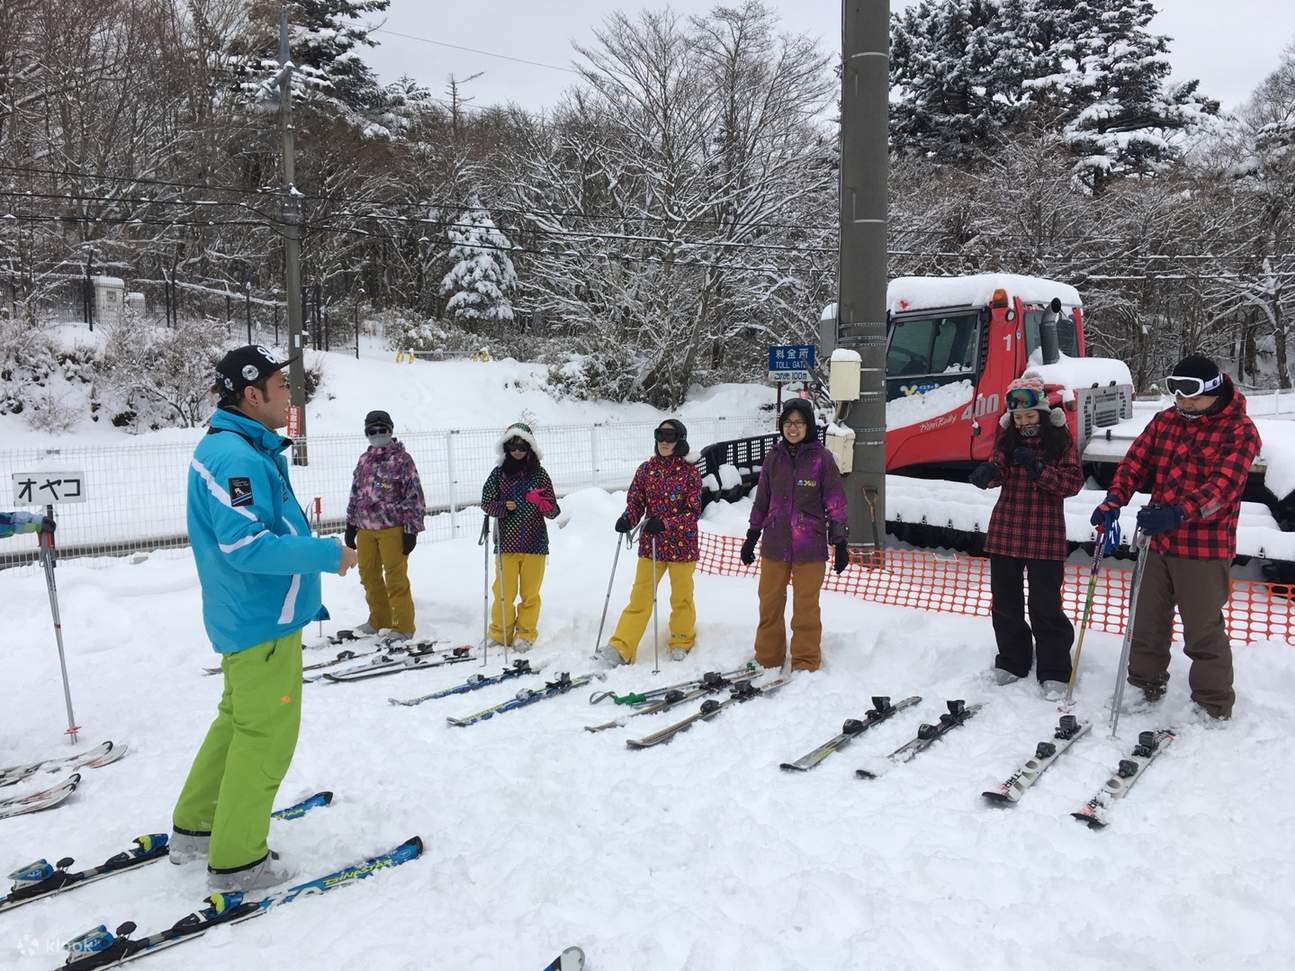 Skiers receiving tips from coach